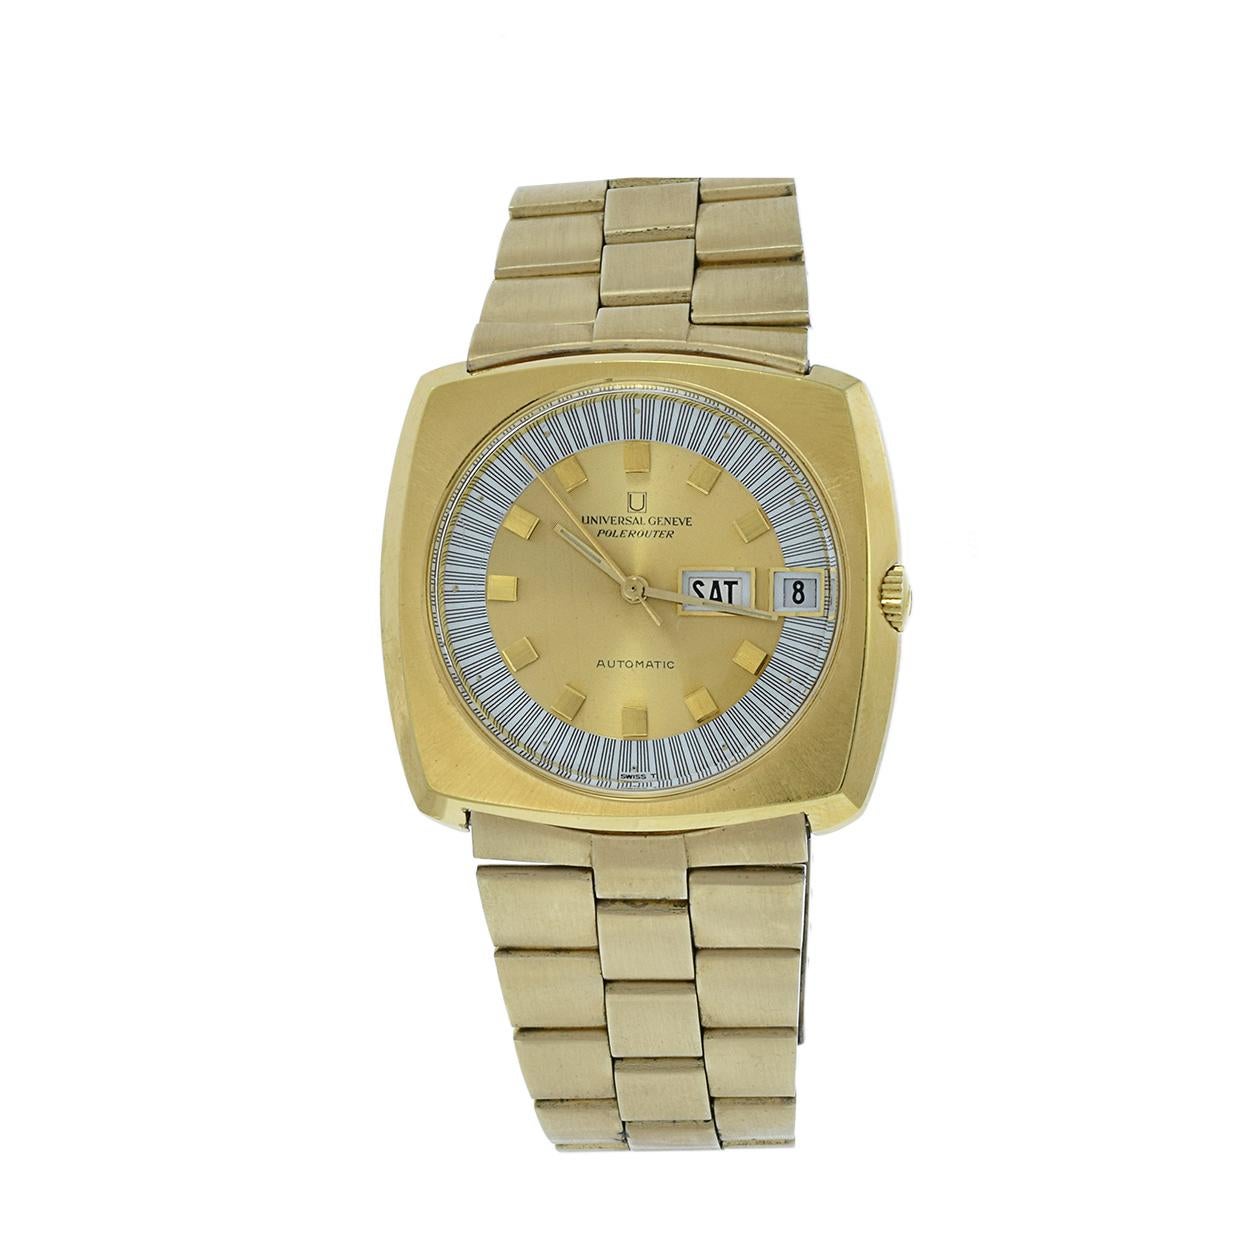 The vintage 1970s Rare Universal Genève Polerouter Automatic timepiece is a distinctive and sought-after watch. Encased in a 40mm square gold-plated case and bracelet, it exudes the characteristic style of the era. The gold dial is adorned with